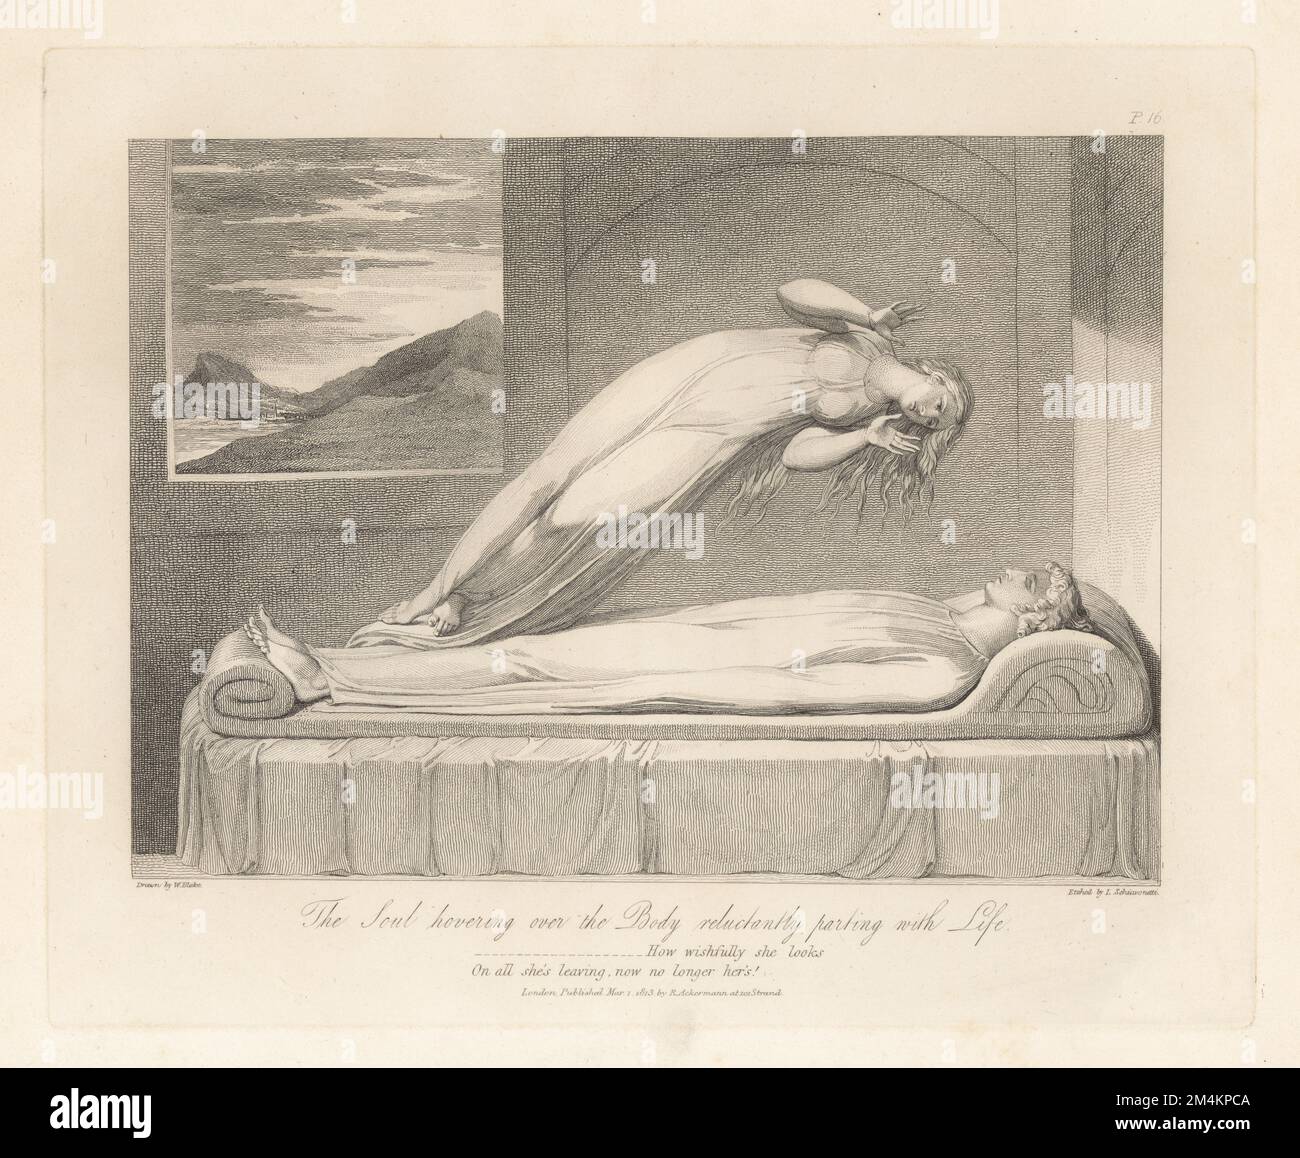 The Soul hovering over the Body reluctantly parting with Life (Plate VI). A woman's spirit looks down with shock at her corpse in a shroud on her deathbed. Mountains and clouds visible through a window. Copperplate engraving by Louis Schiavonetti after an original drawing by William Blake from Robert Blair’s The Grave, T. Bensley for Rudolph Ackermann, 1813. Stock Photo